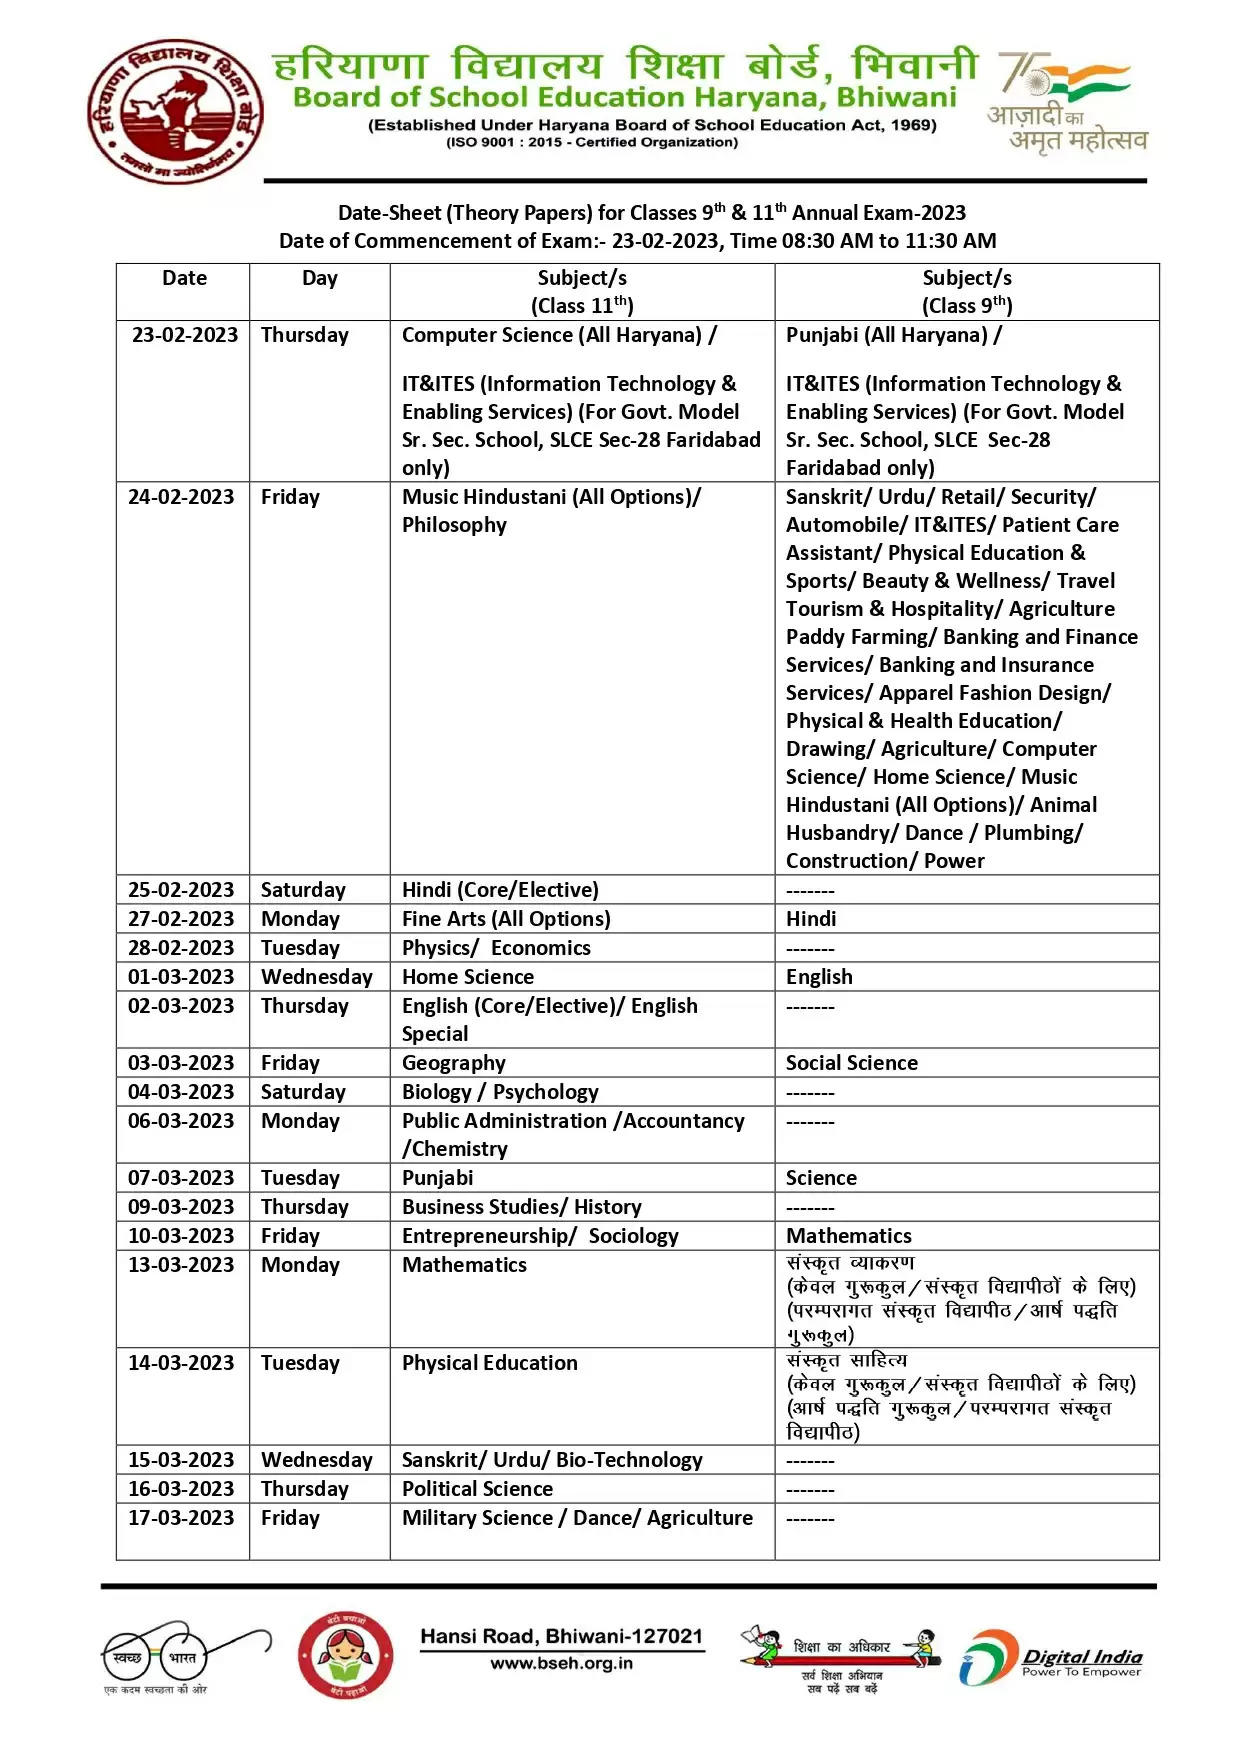 Date Sheet:- (Theory Papers) for classes 9th & 11th Annual Exam-2023  